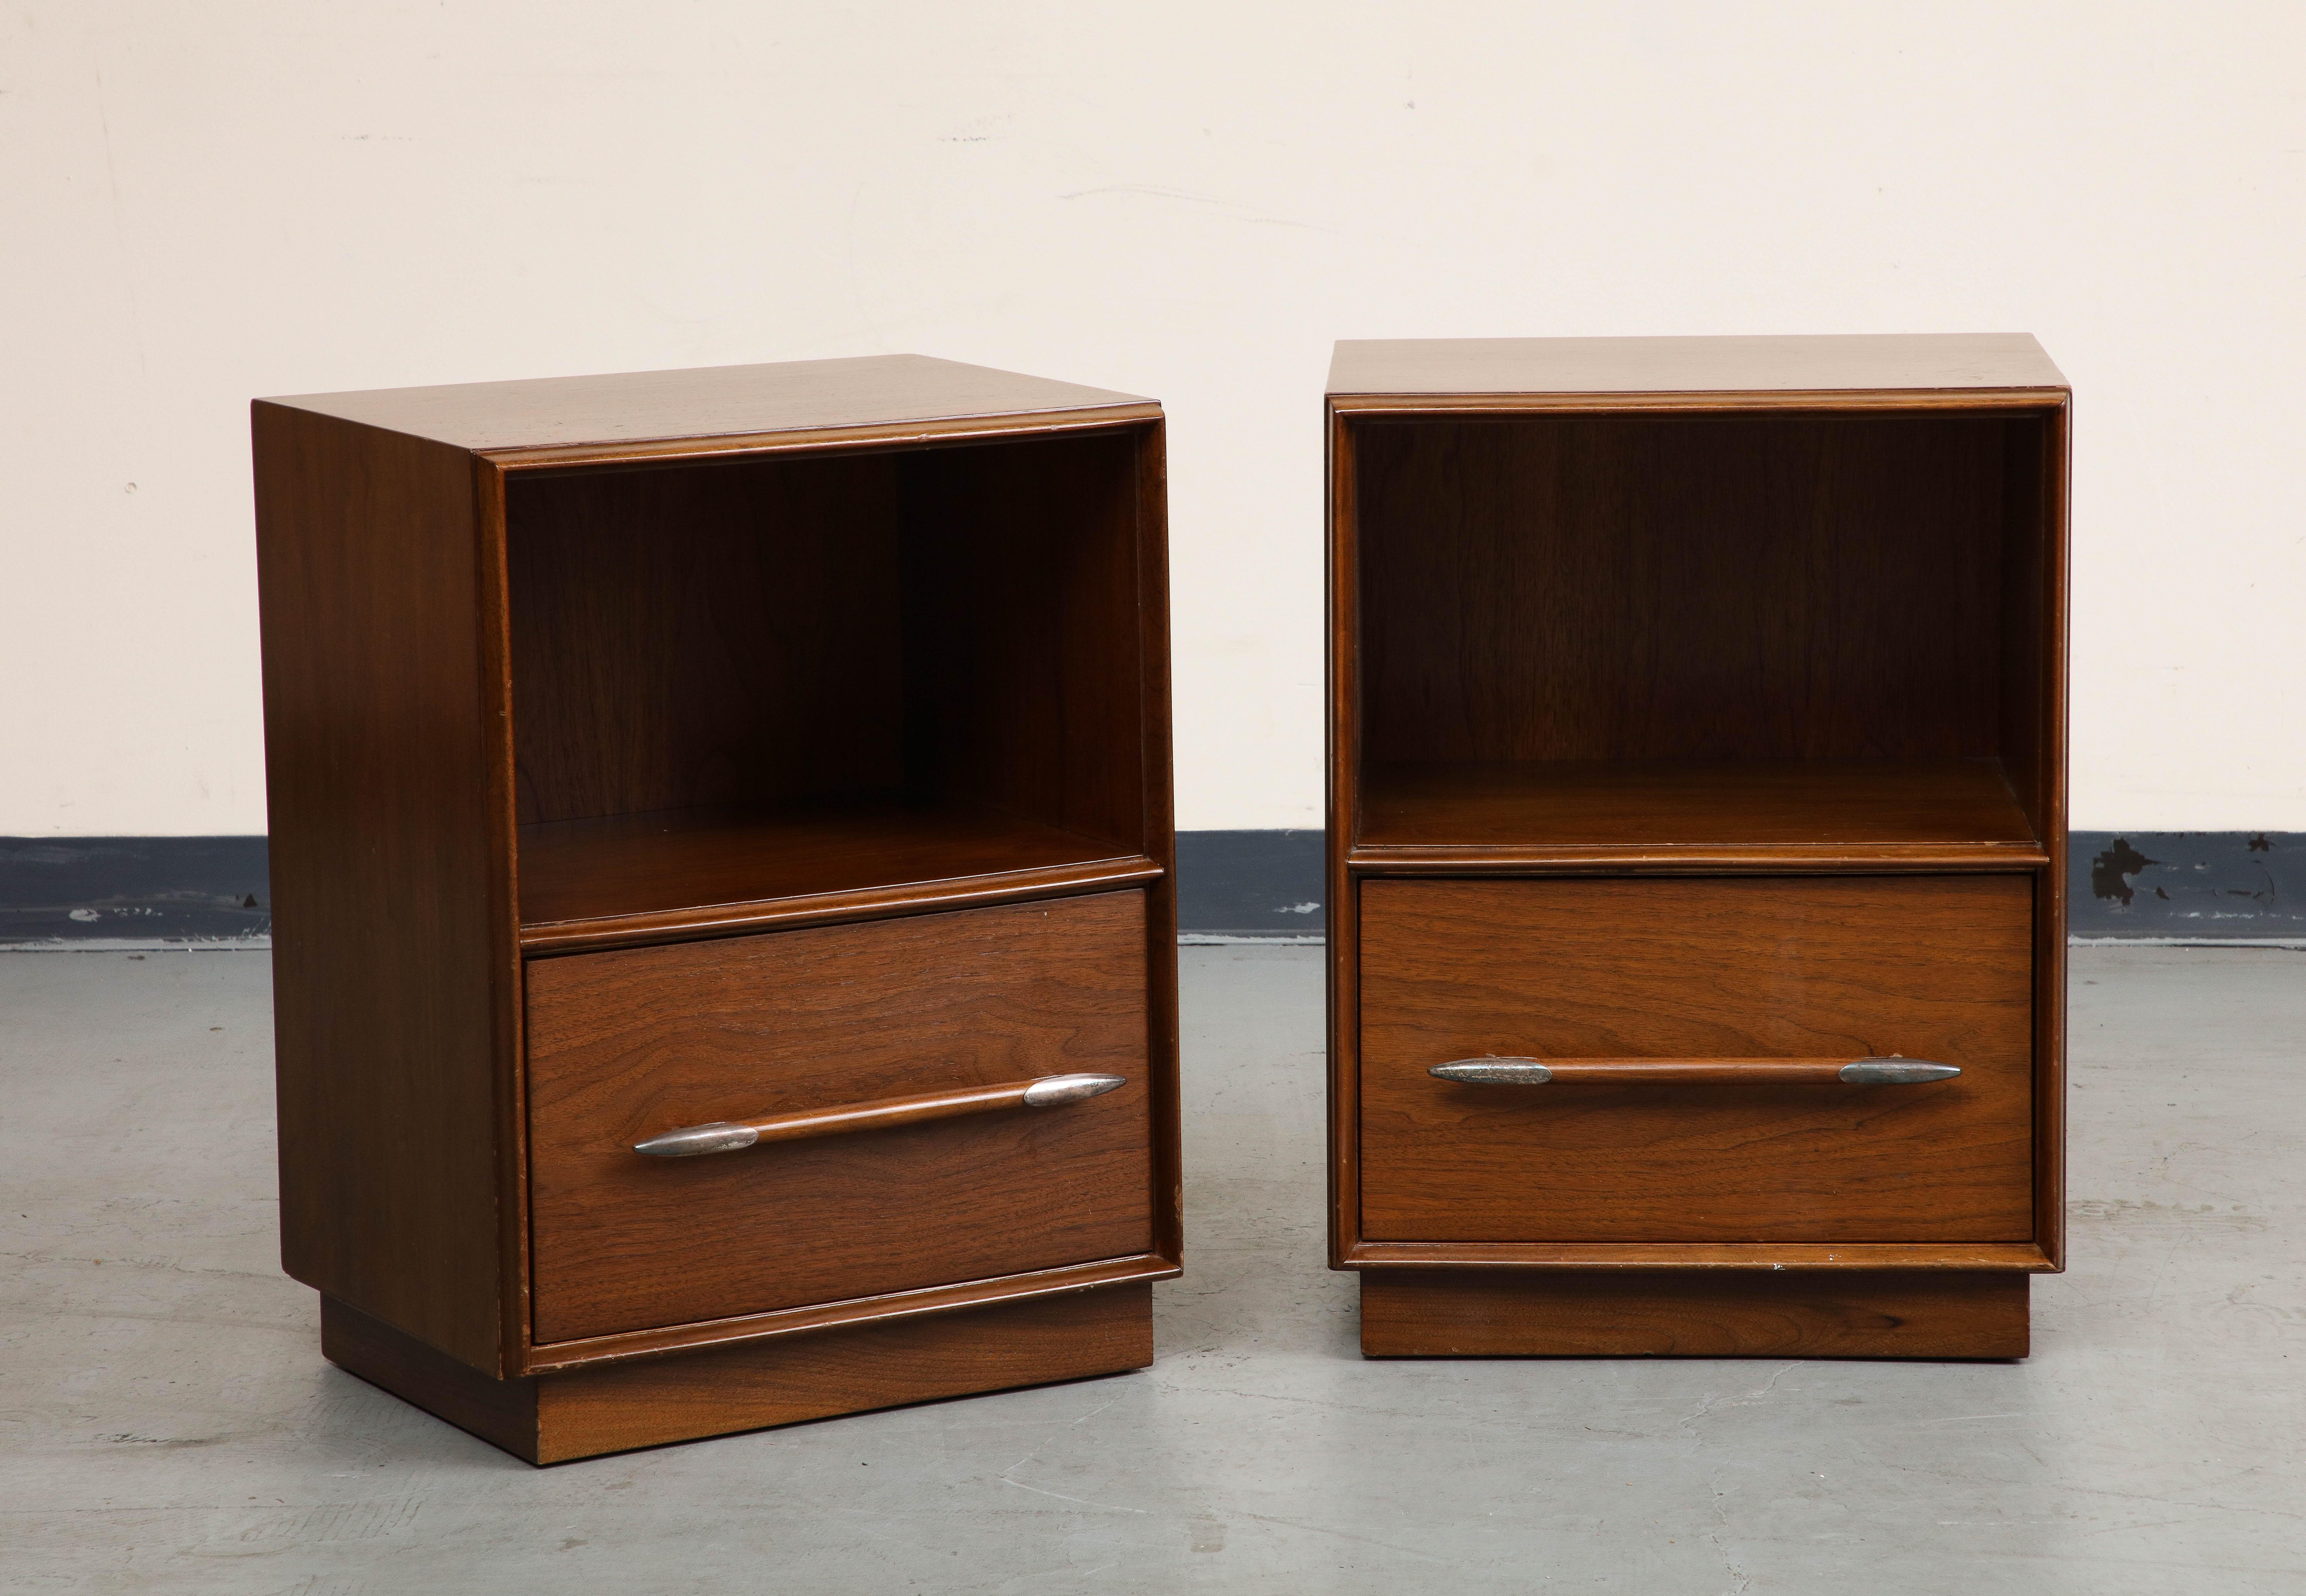 Pair of 1950s Walnut Nightstands or End Tables, featuring one drawer with silvered spear shaped handles and an open upper compartment for storage. 

Classic midcentury design by T.H. Robsjohn-Gibbings for The Widdicomb Furniture Company.